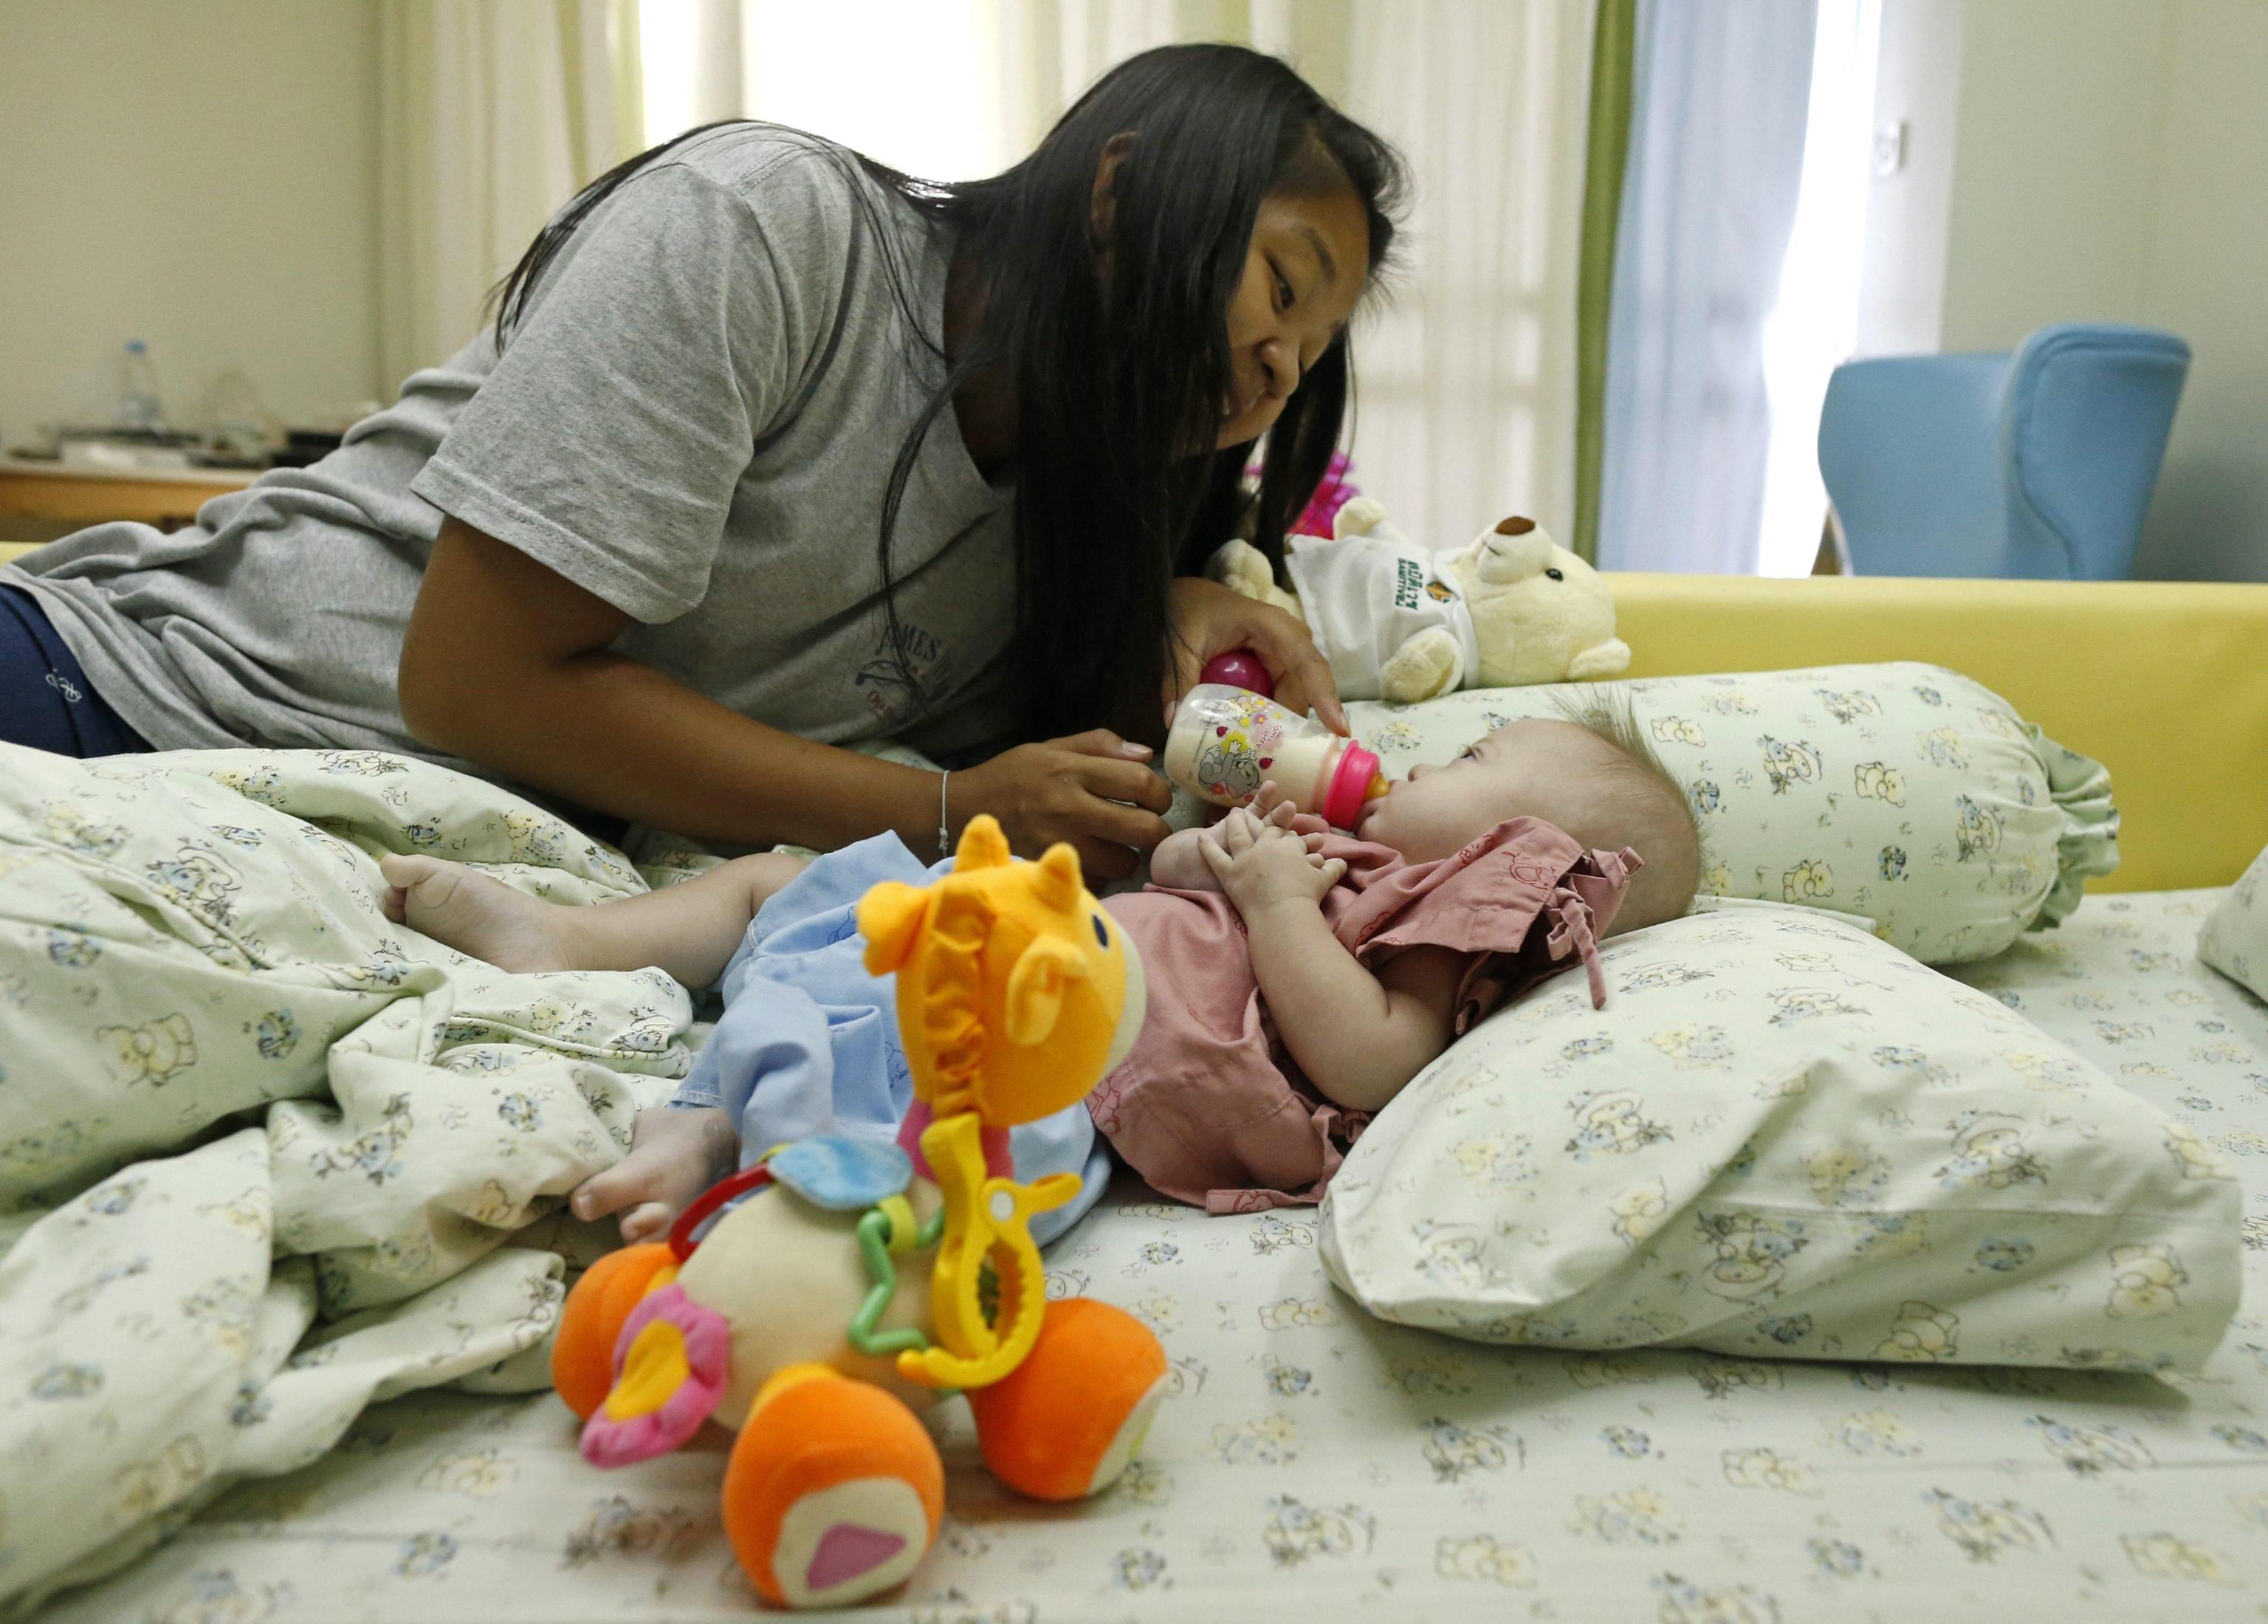 Thai surrogate mother Pattharamon Janbua with her seven-month-old Down's Syndrome baby